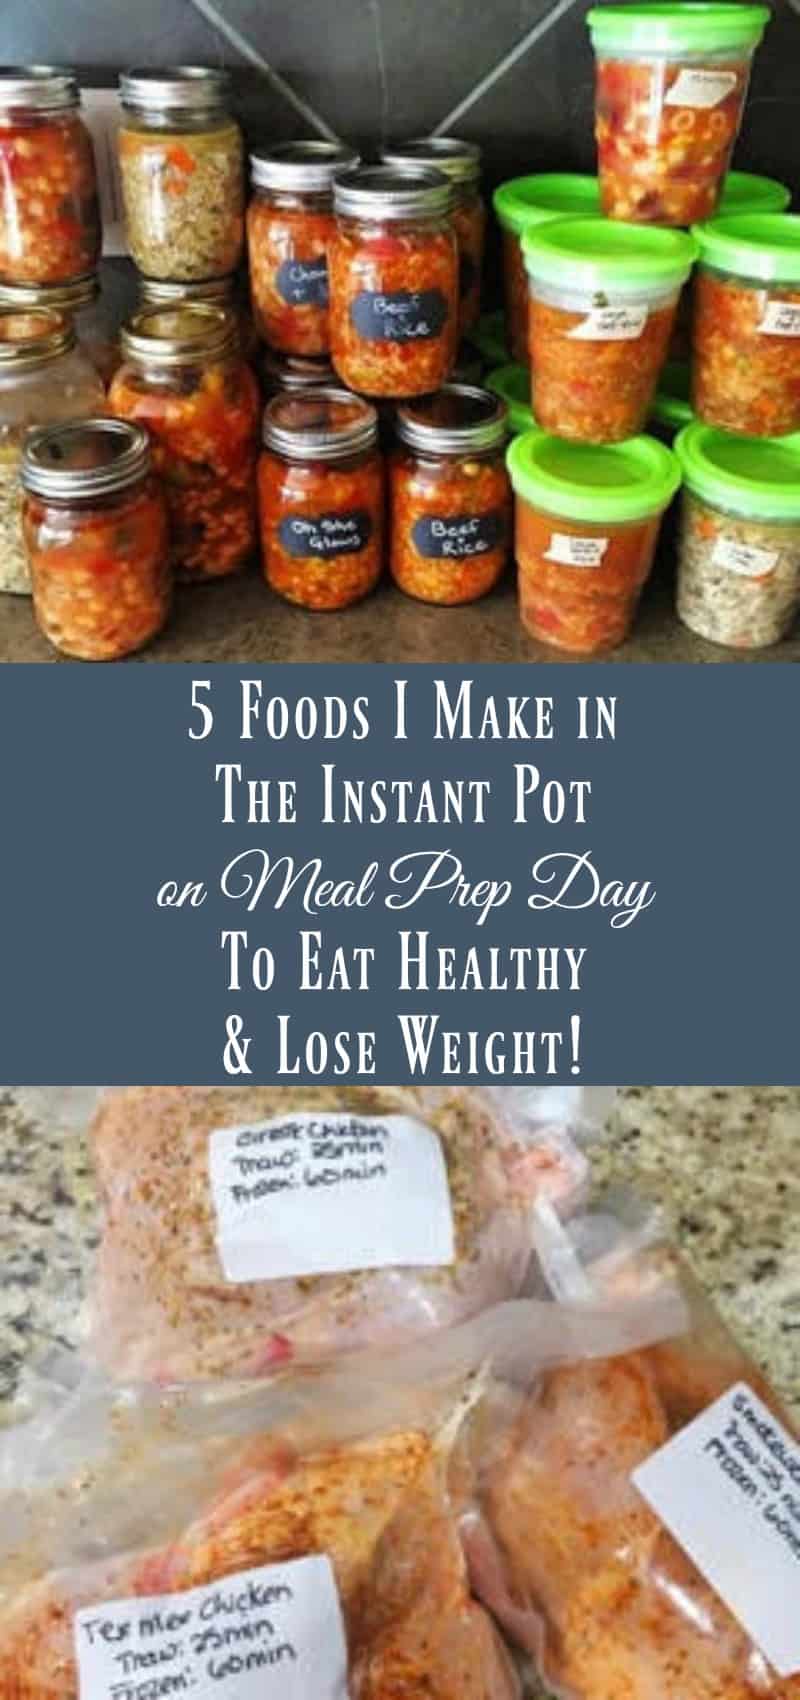 5 Foods I Make In The Instant Pot on Meal Prep Day to Eat Healthy and Lose Weight